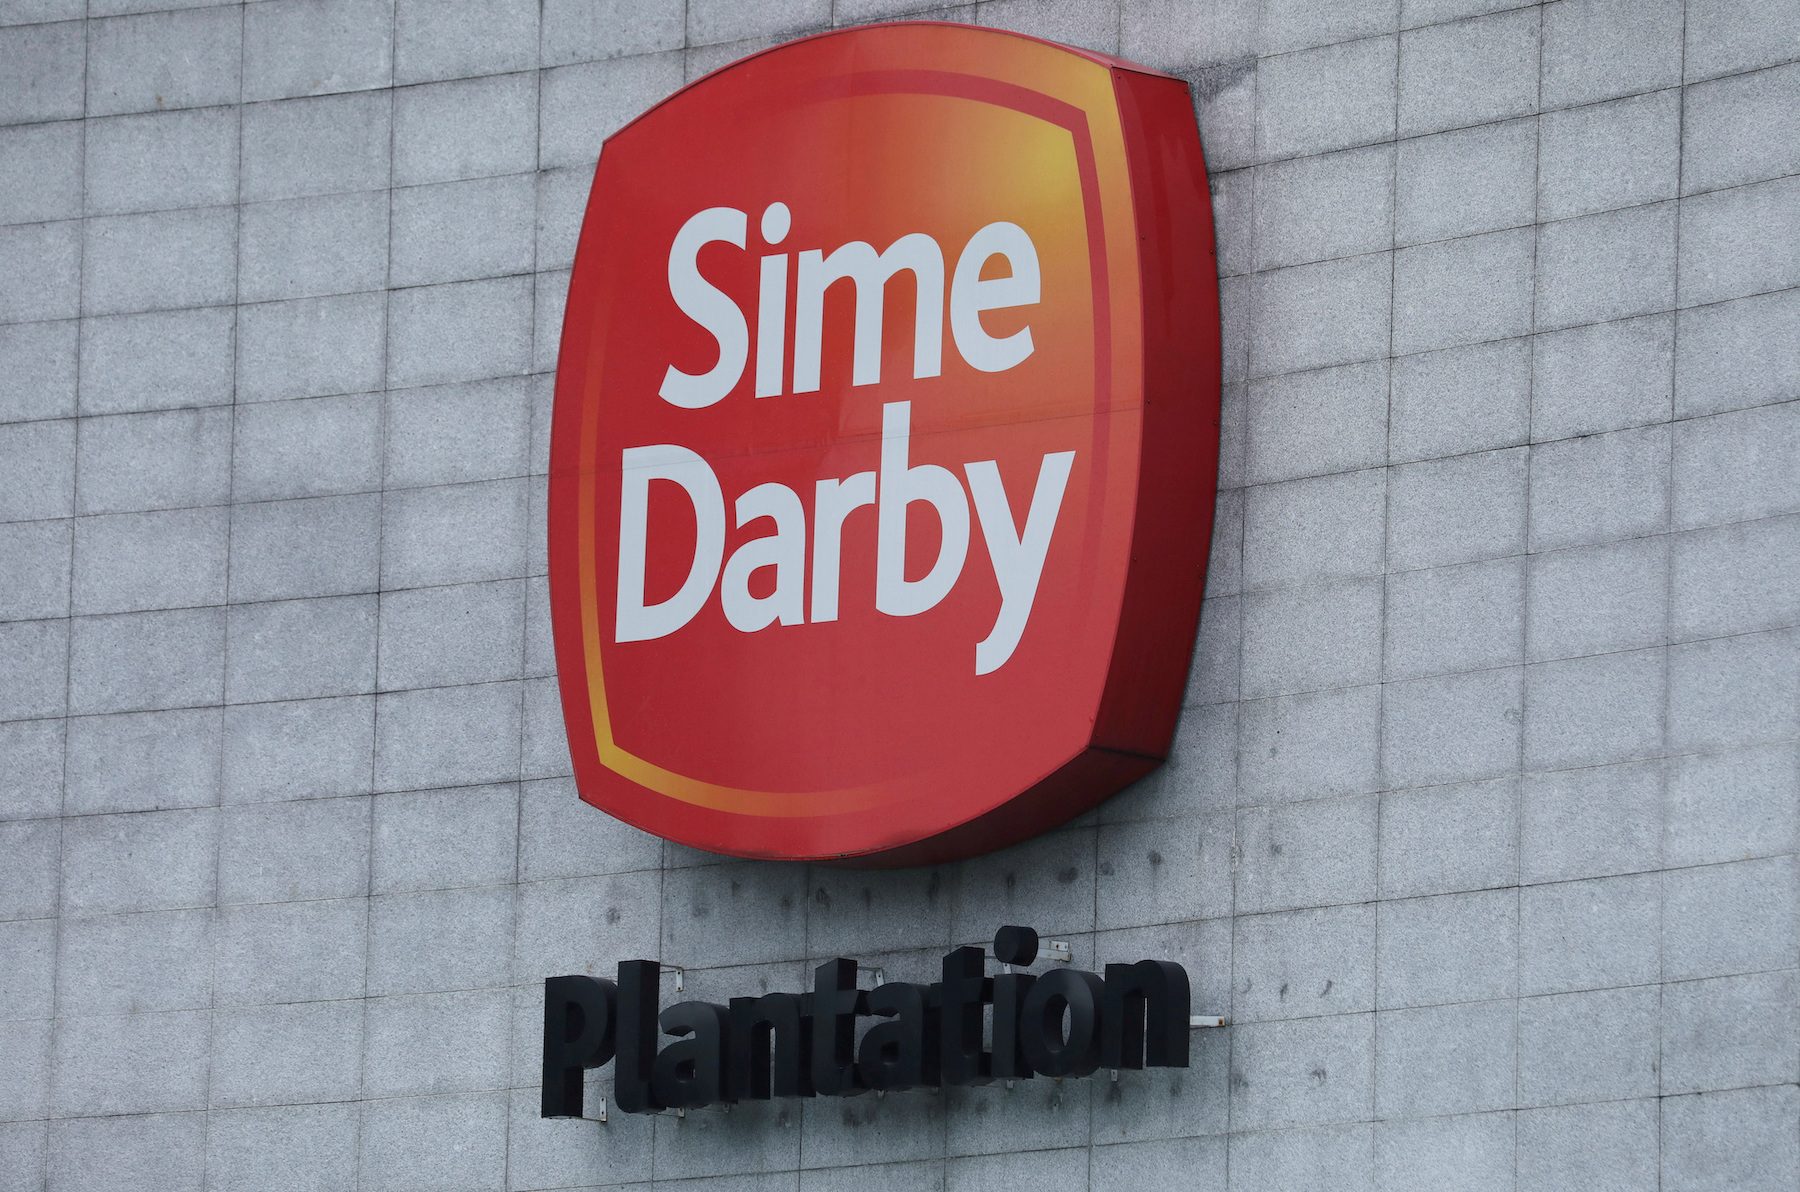 US lifts import ban on Sime Darby Plantation products